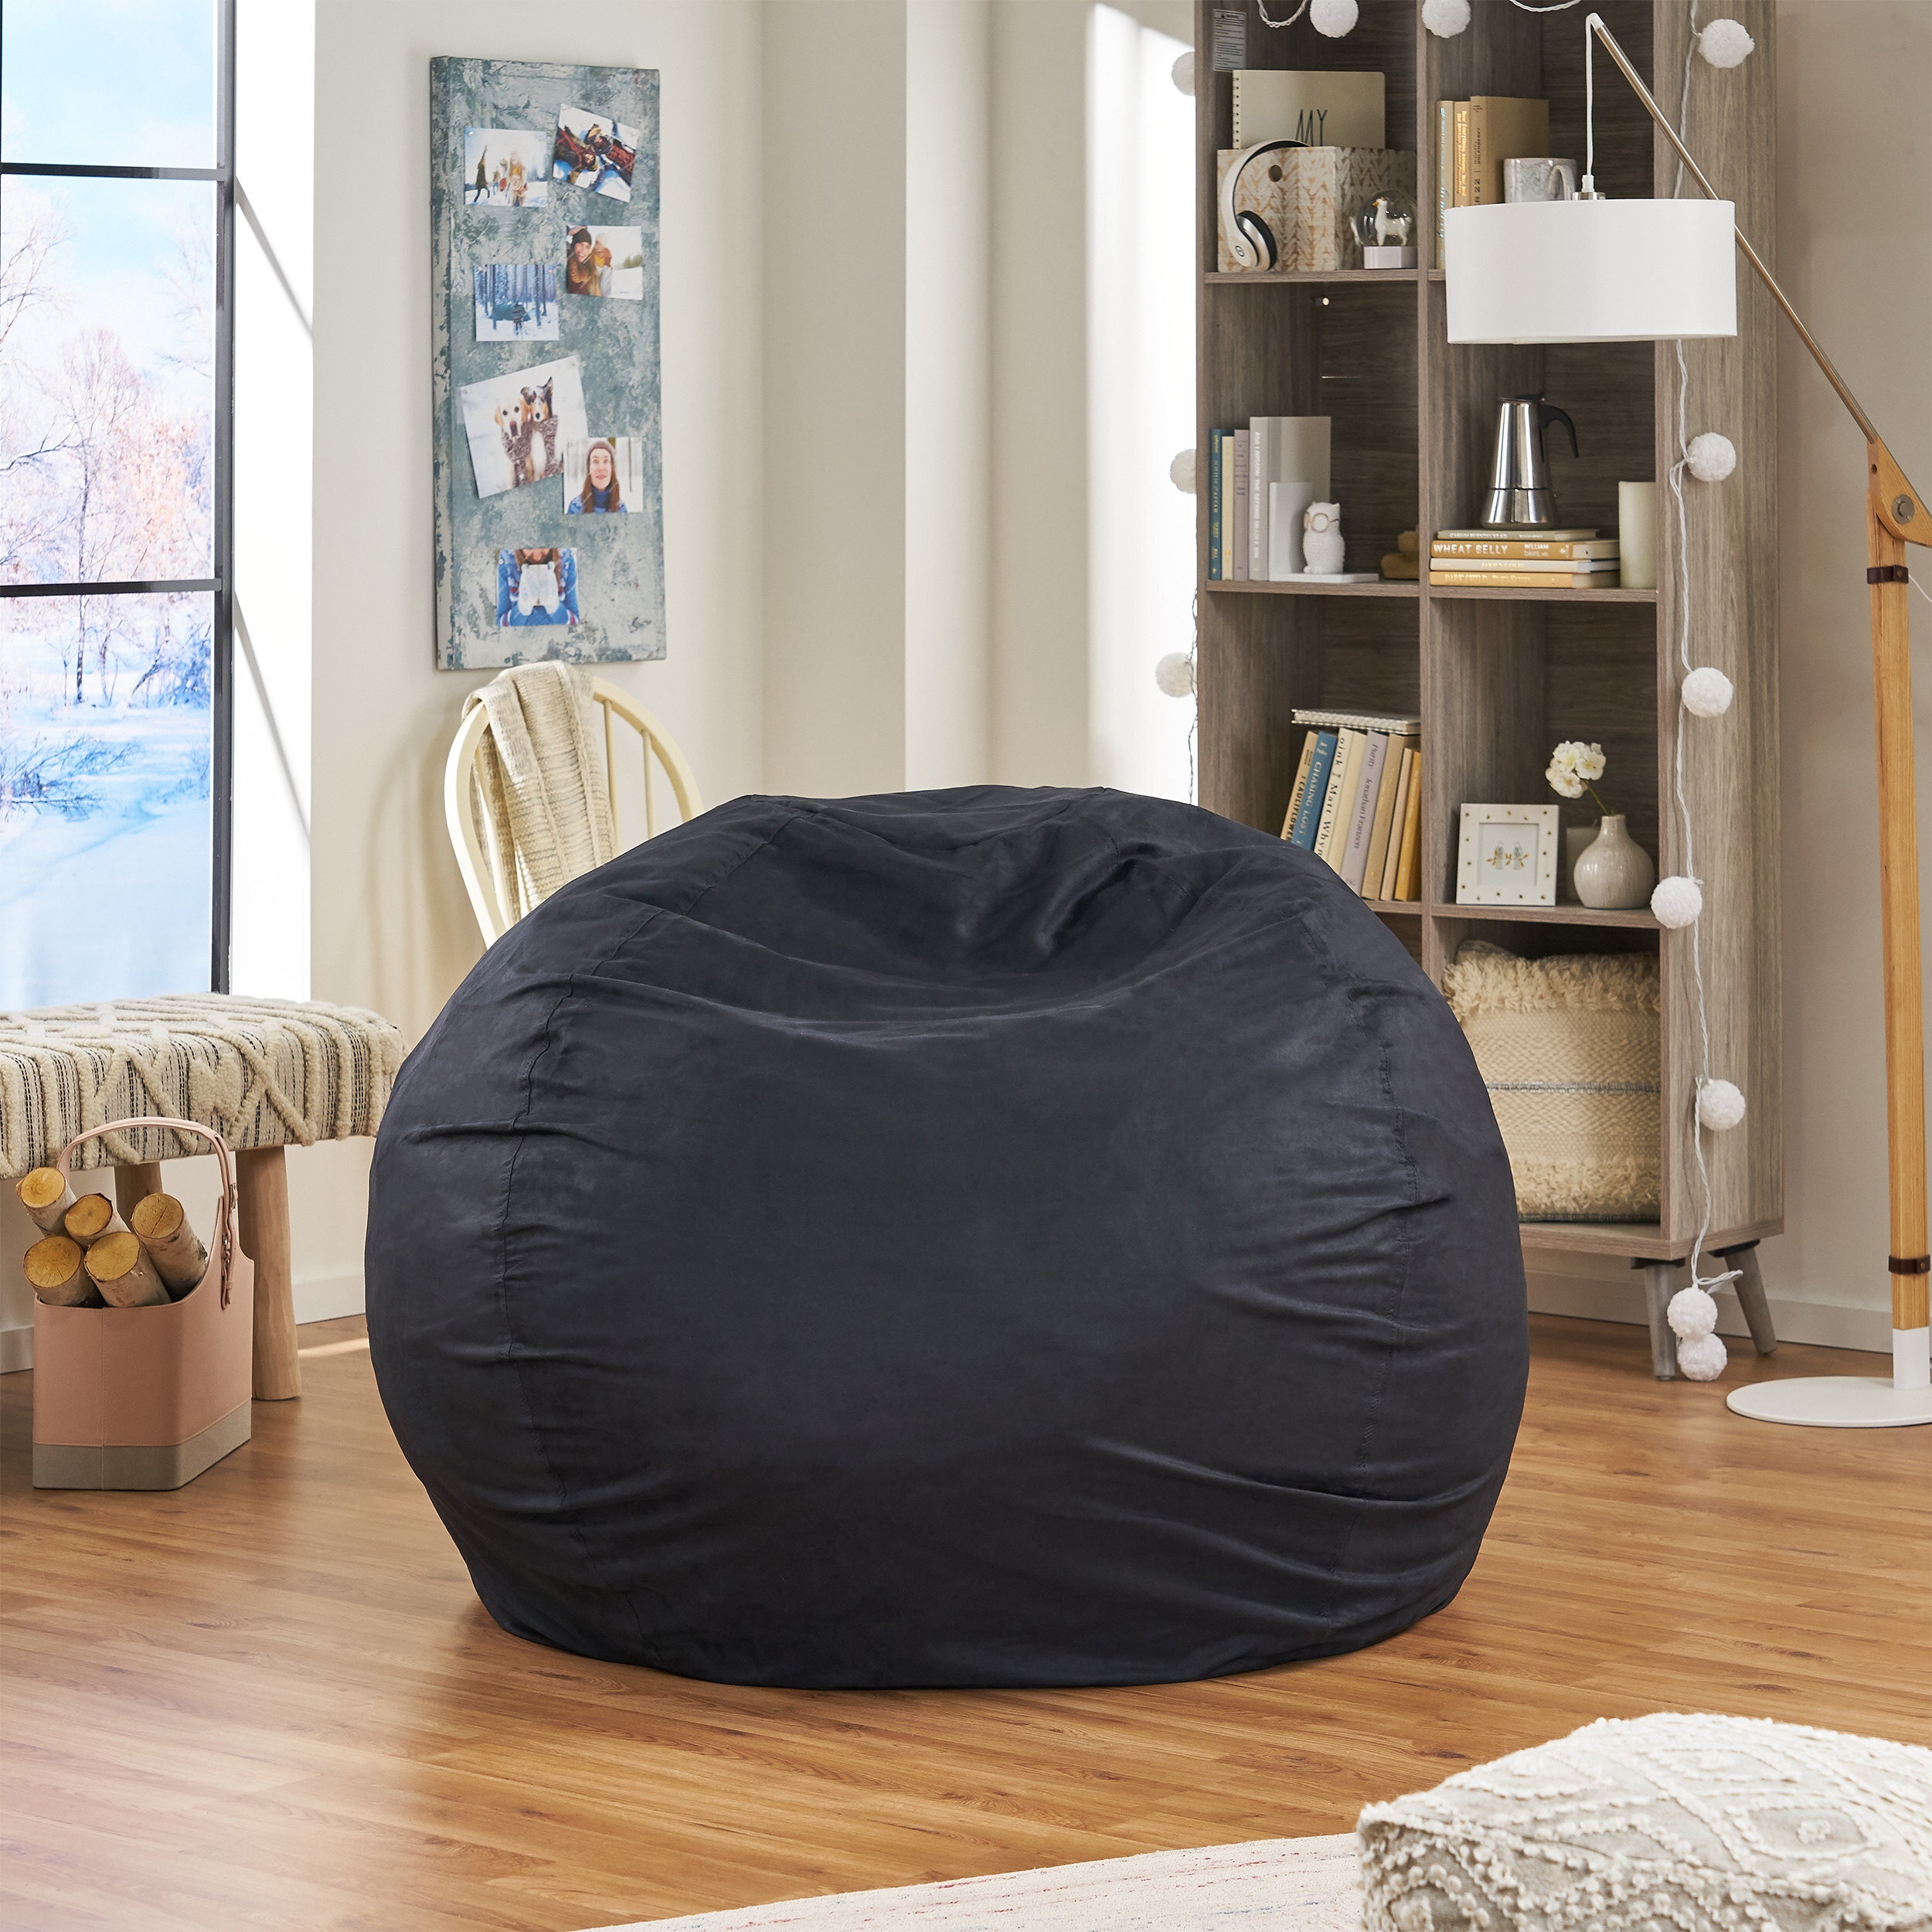 Large Faux Leather Bean Bag Chairs Cover for Adults Washable Ultra Soft  Bean Bag Chair Cover for Floor Seating,Lounge Relaxing,Video Games,Movie